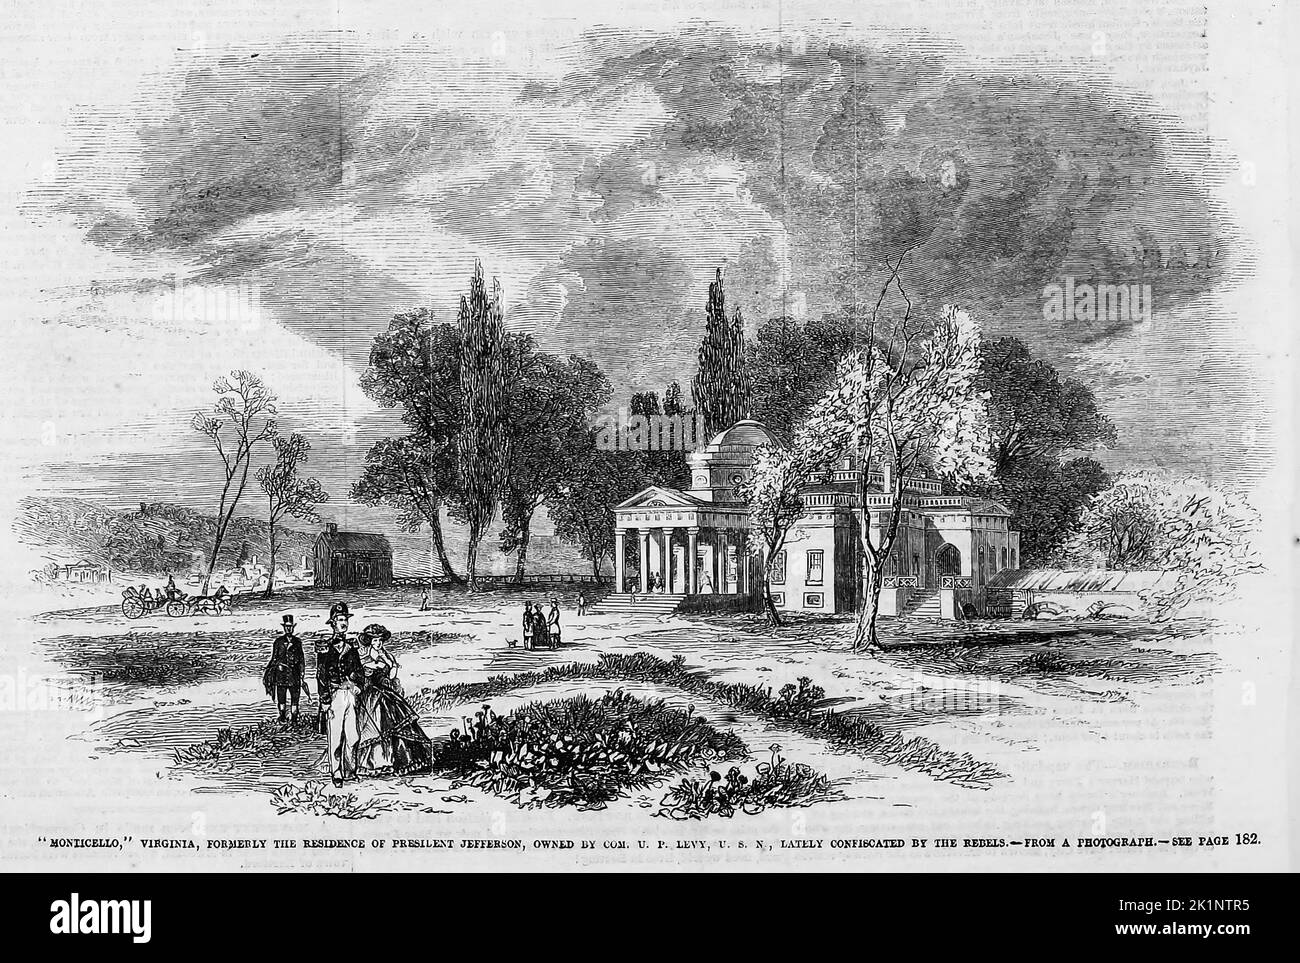 'Monticello,' Virginia, formerly the residence of President Thomas Jefferson, owned by Commander Uriah Phillips Levy, United States Navy, lately confiscated by the Rebels. February 1862. 19th century American Civil War illustration from Frank Leslie's Illustrated Newspaper Stock Photo